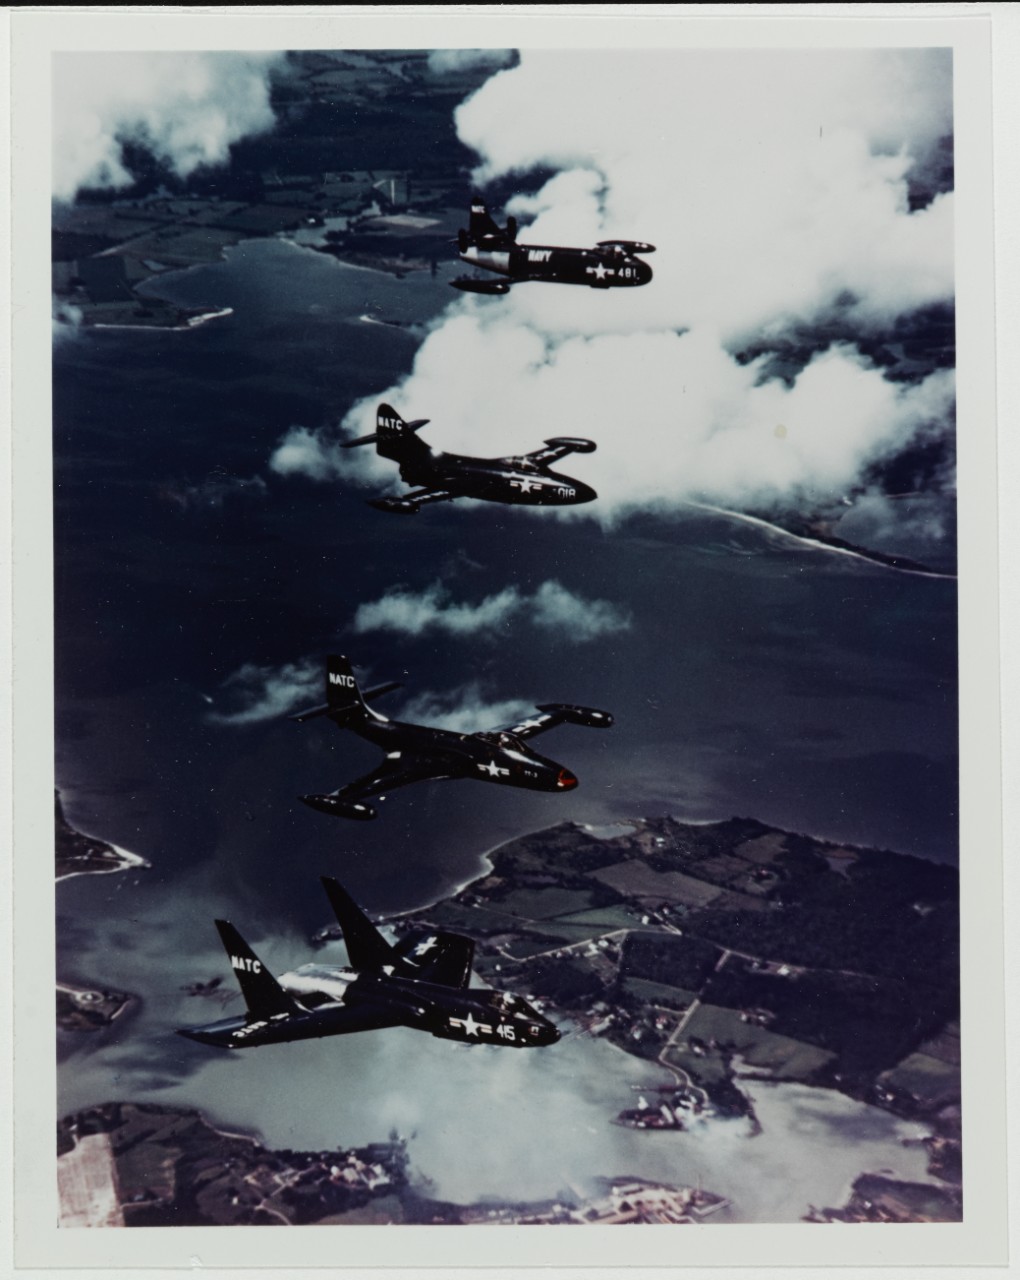 Vought F7U-1 Cutlass, McDonnell F2H-2 Banshee, Grumman F9F Panther, Vought F6U-1 Pirate flying in formation, circa 1950s